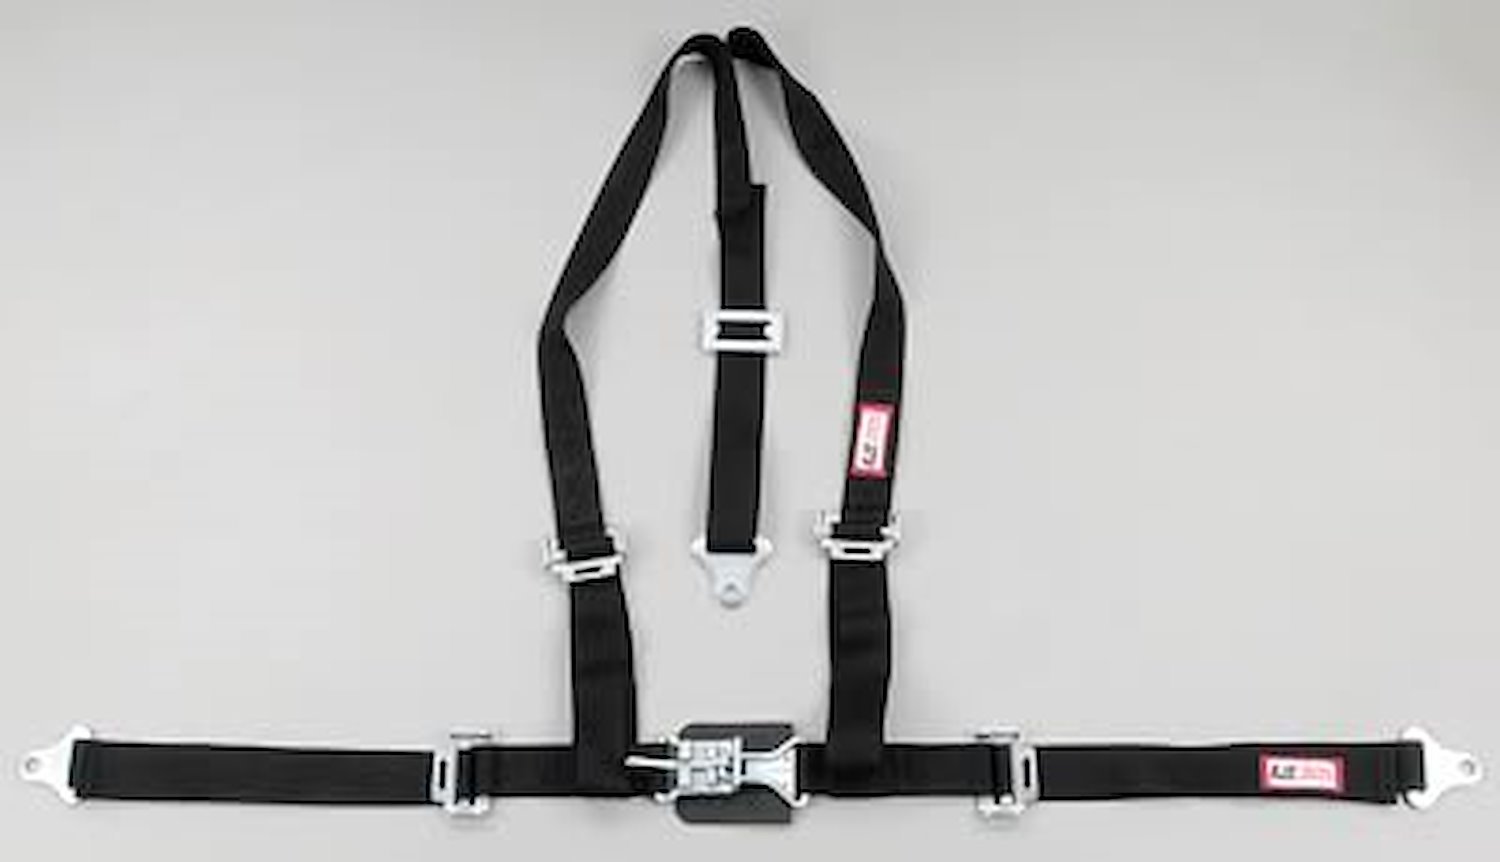 NON-SFI L&L HARNESS 3 PULL UP Lap BELT SNAP SEWN IN 2 S.H. Y FLOOR Mount w/STERNUM STRAP WRAP/SNAP PURPLE